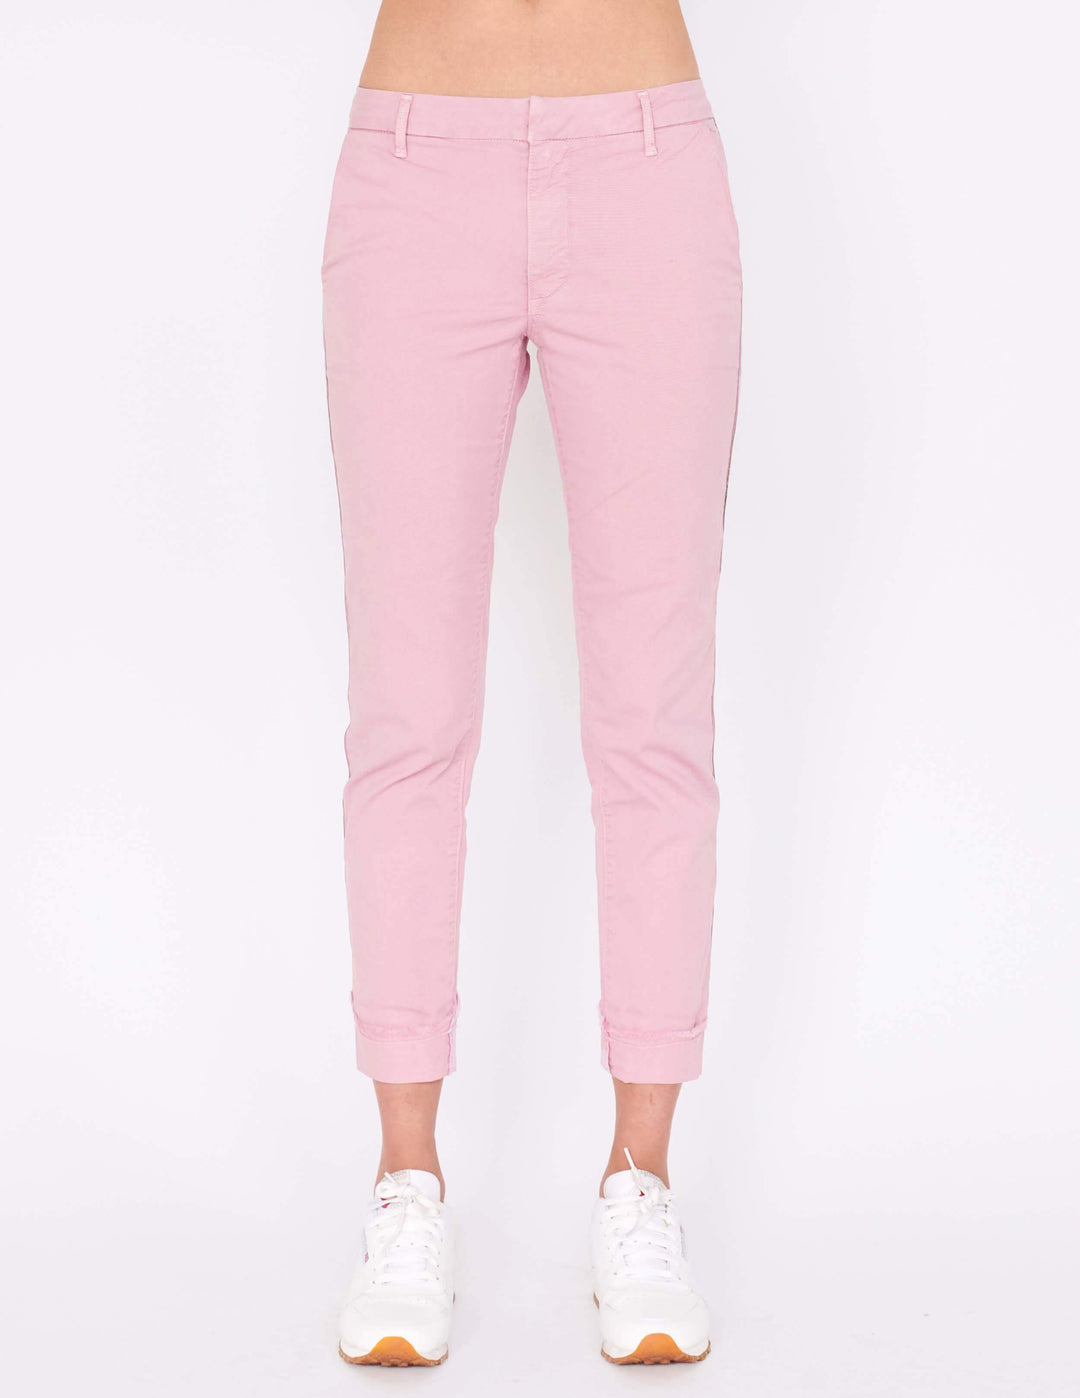 Sundry Rollup Trouser With Trim - Bubble Gum